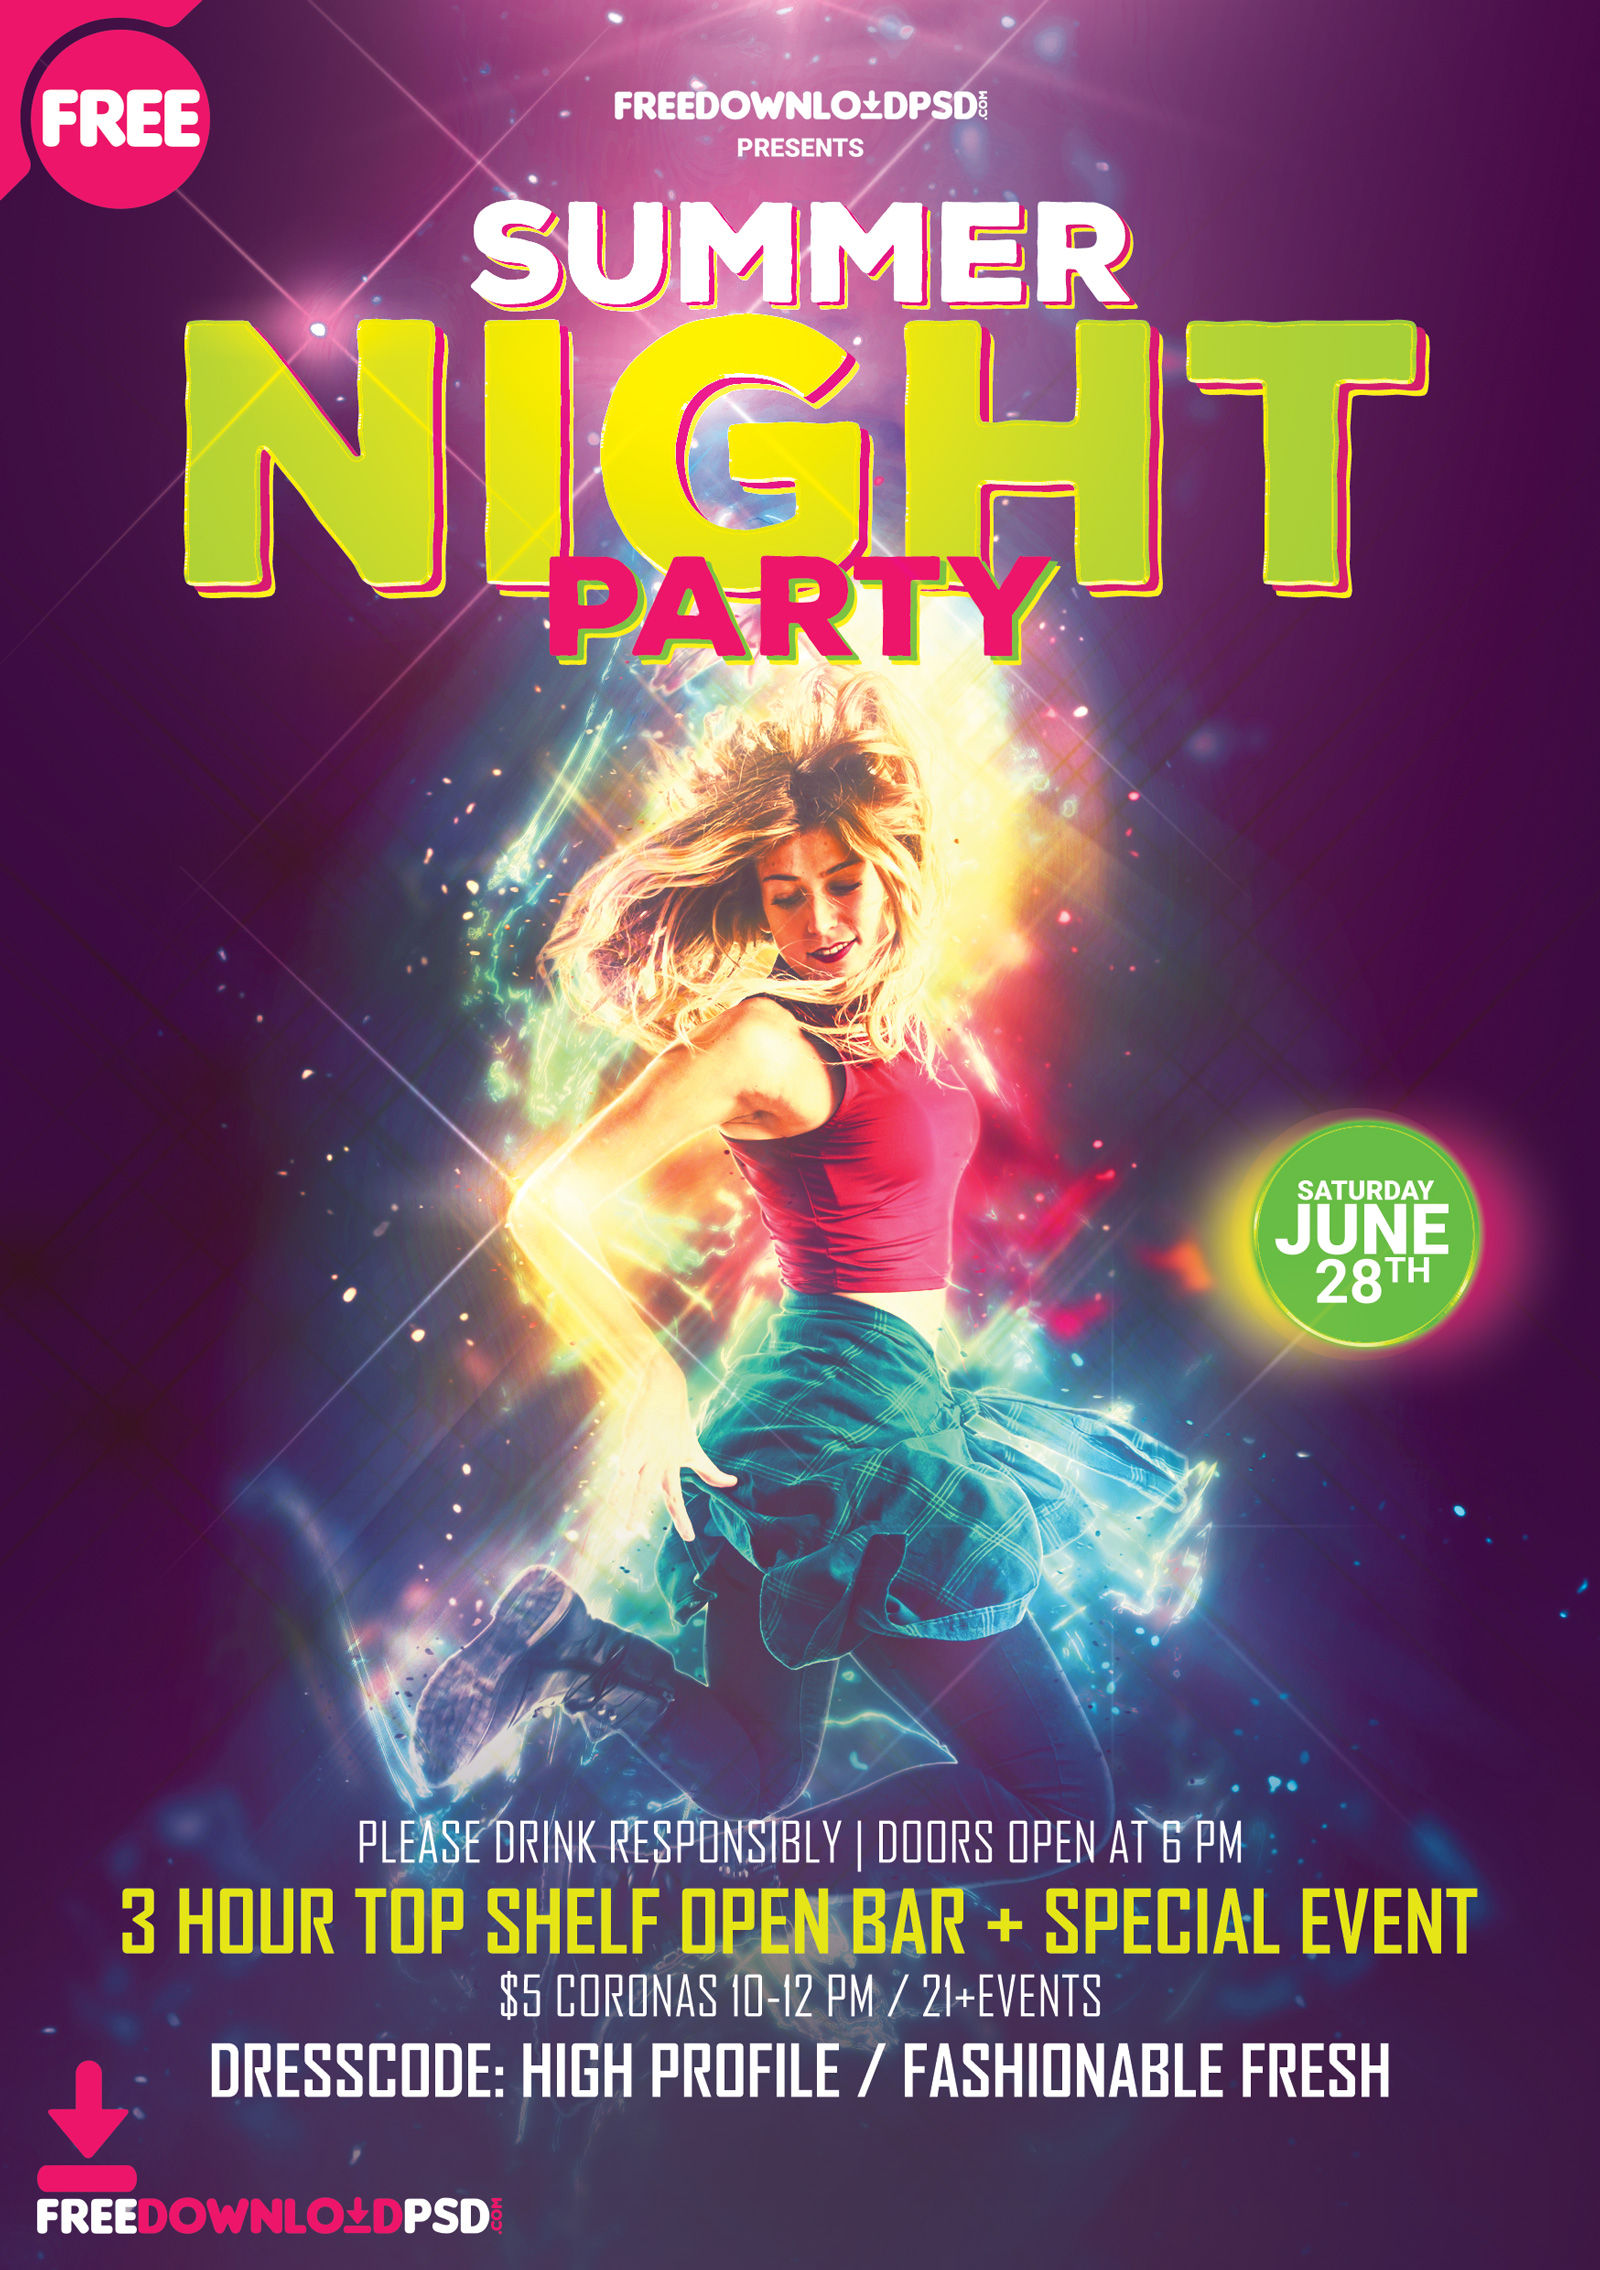 Summer Night Party Flyer  template  PSD FreedownloadPSD com